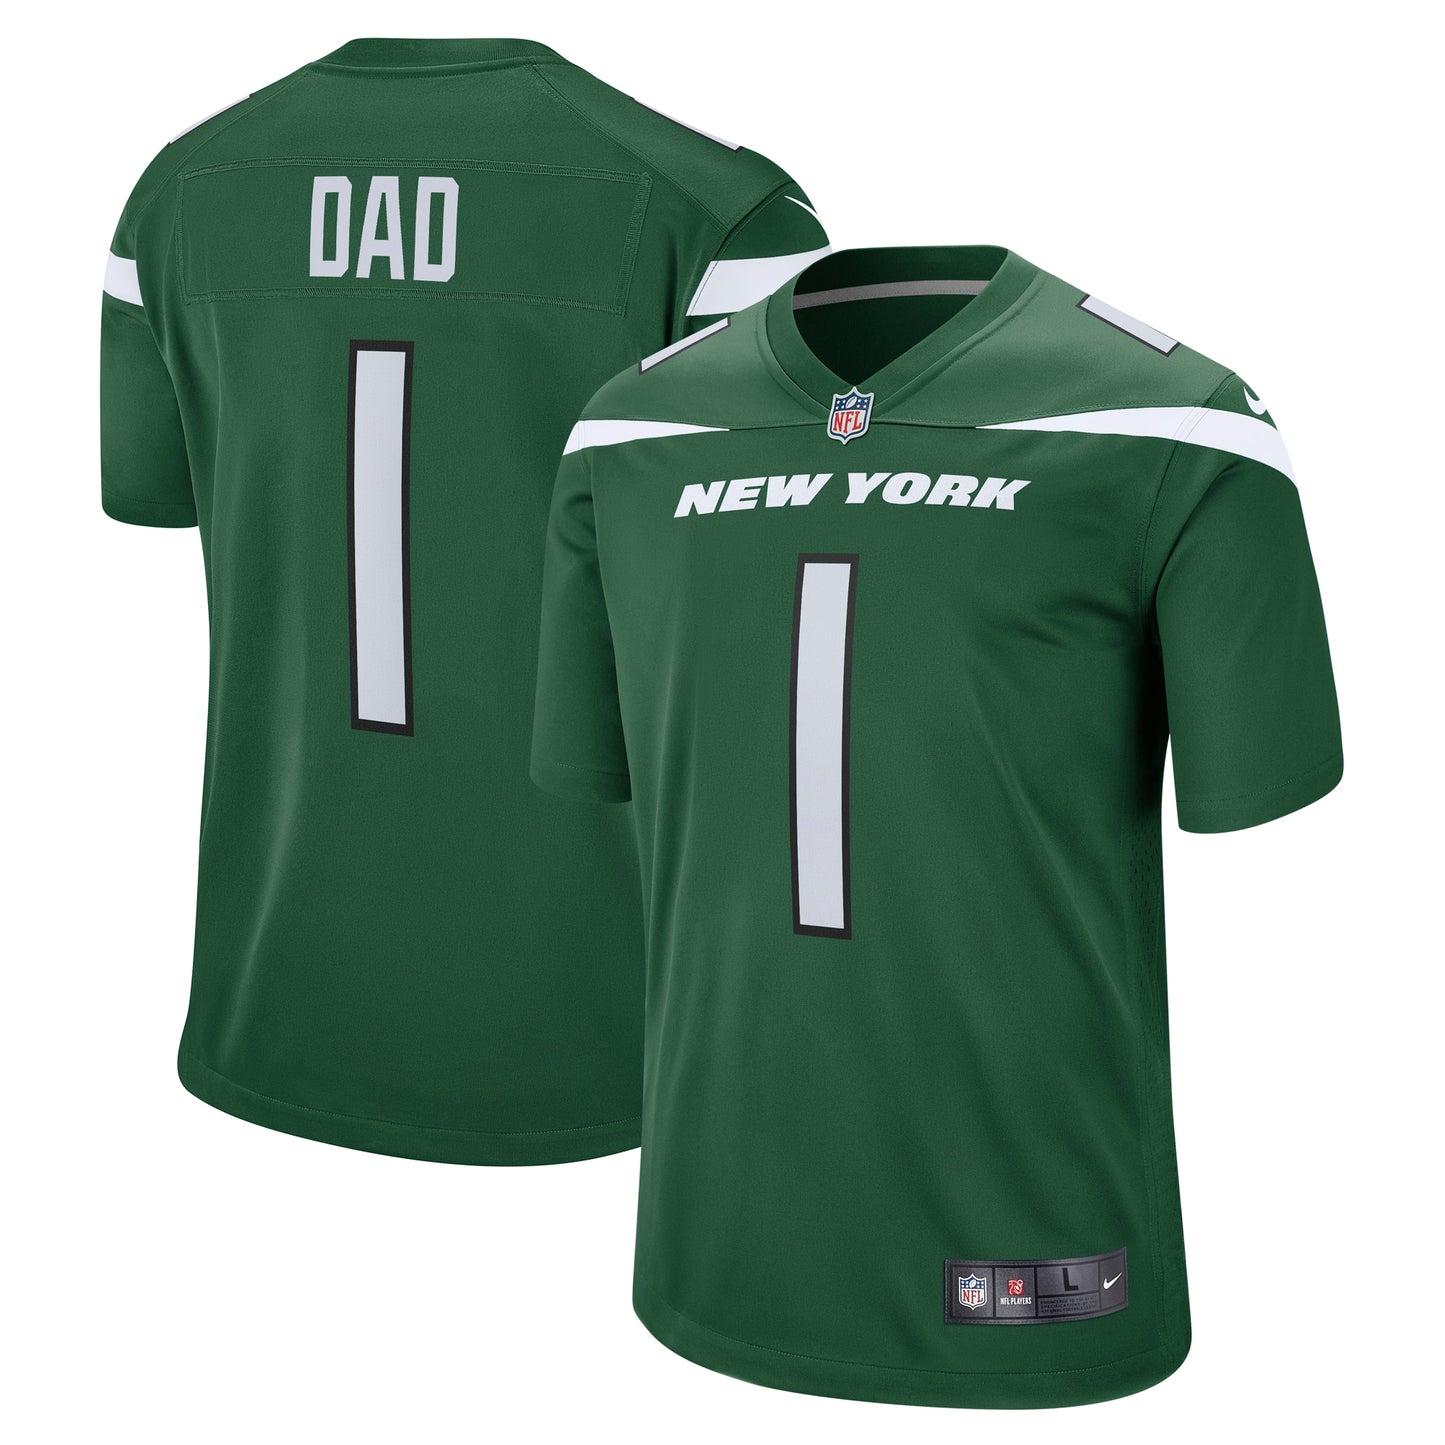 Number 1 Dad New York Jets Nike Game Jersey - Gotham Green